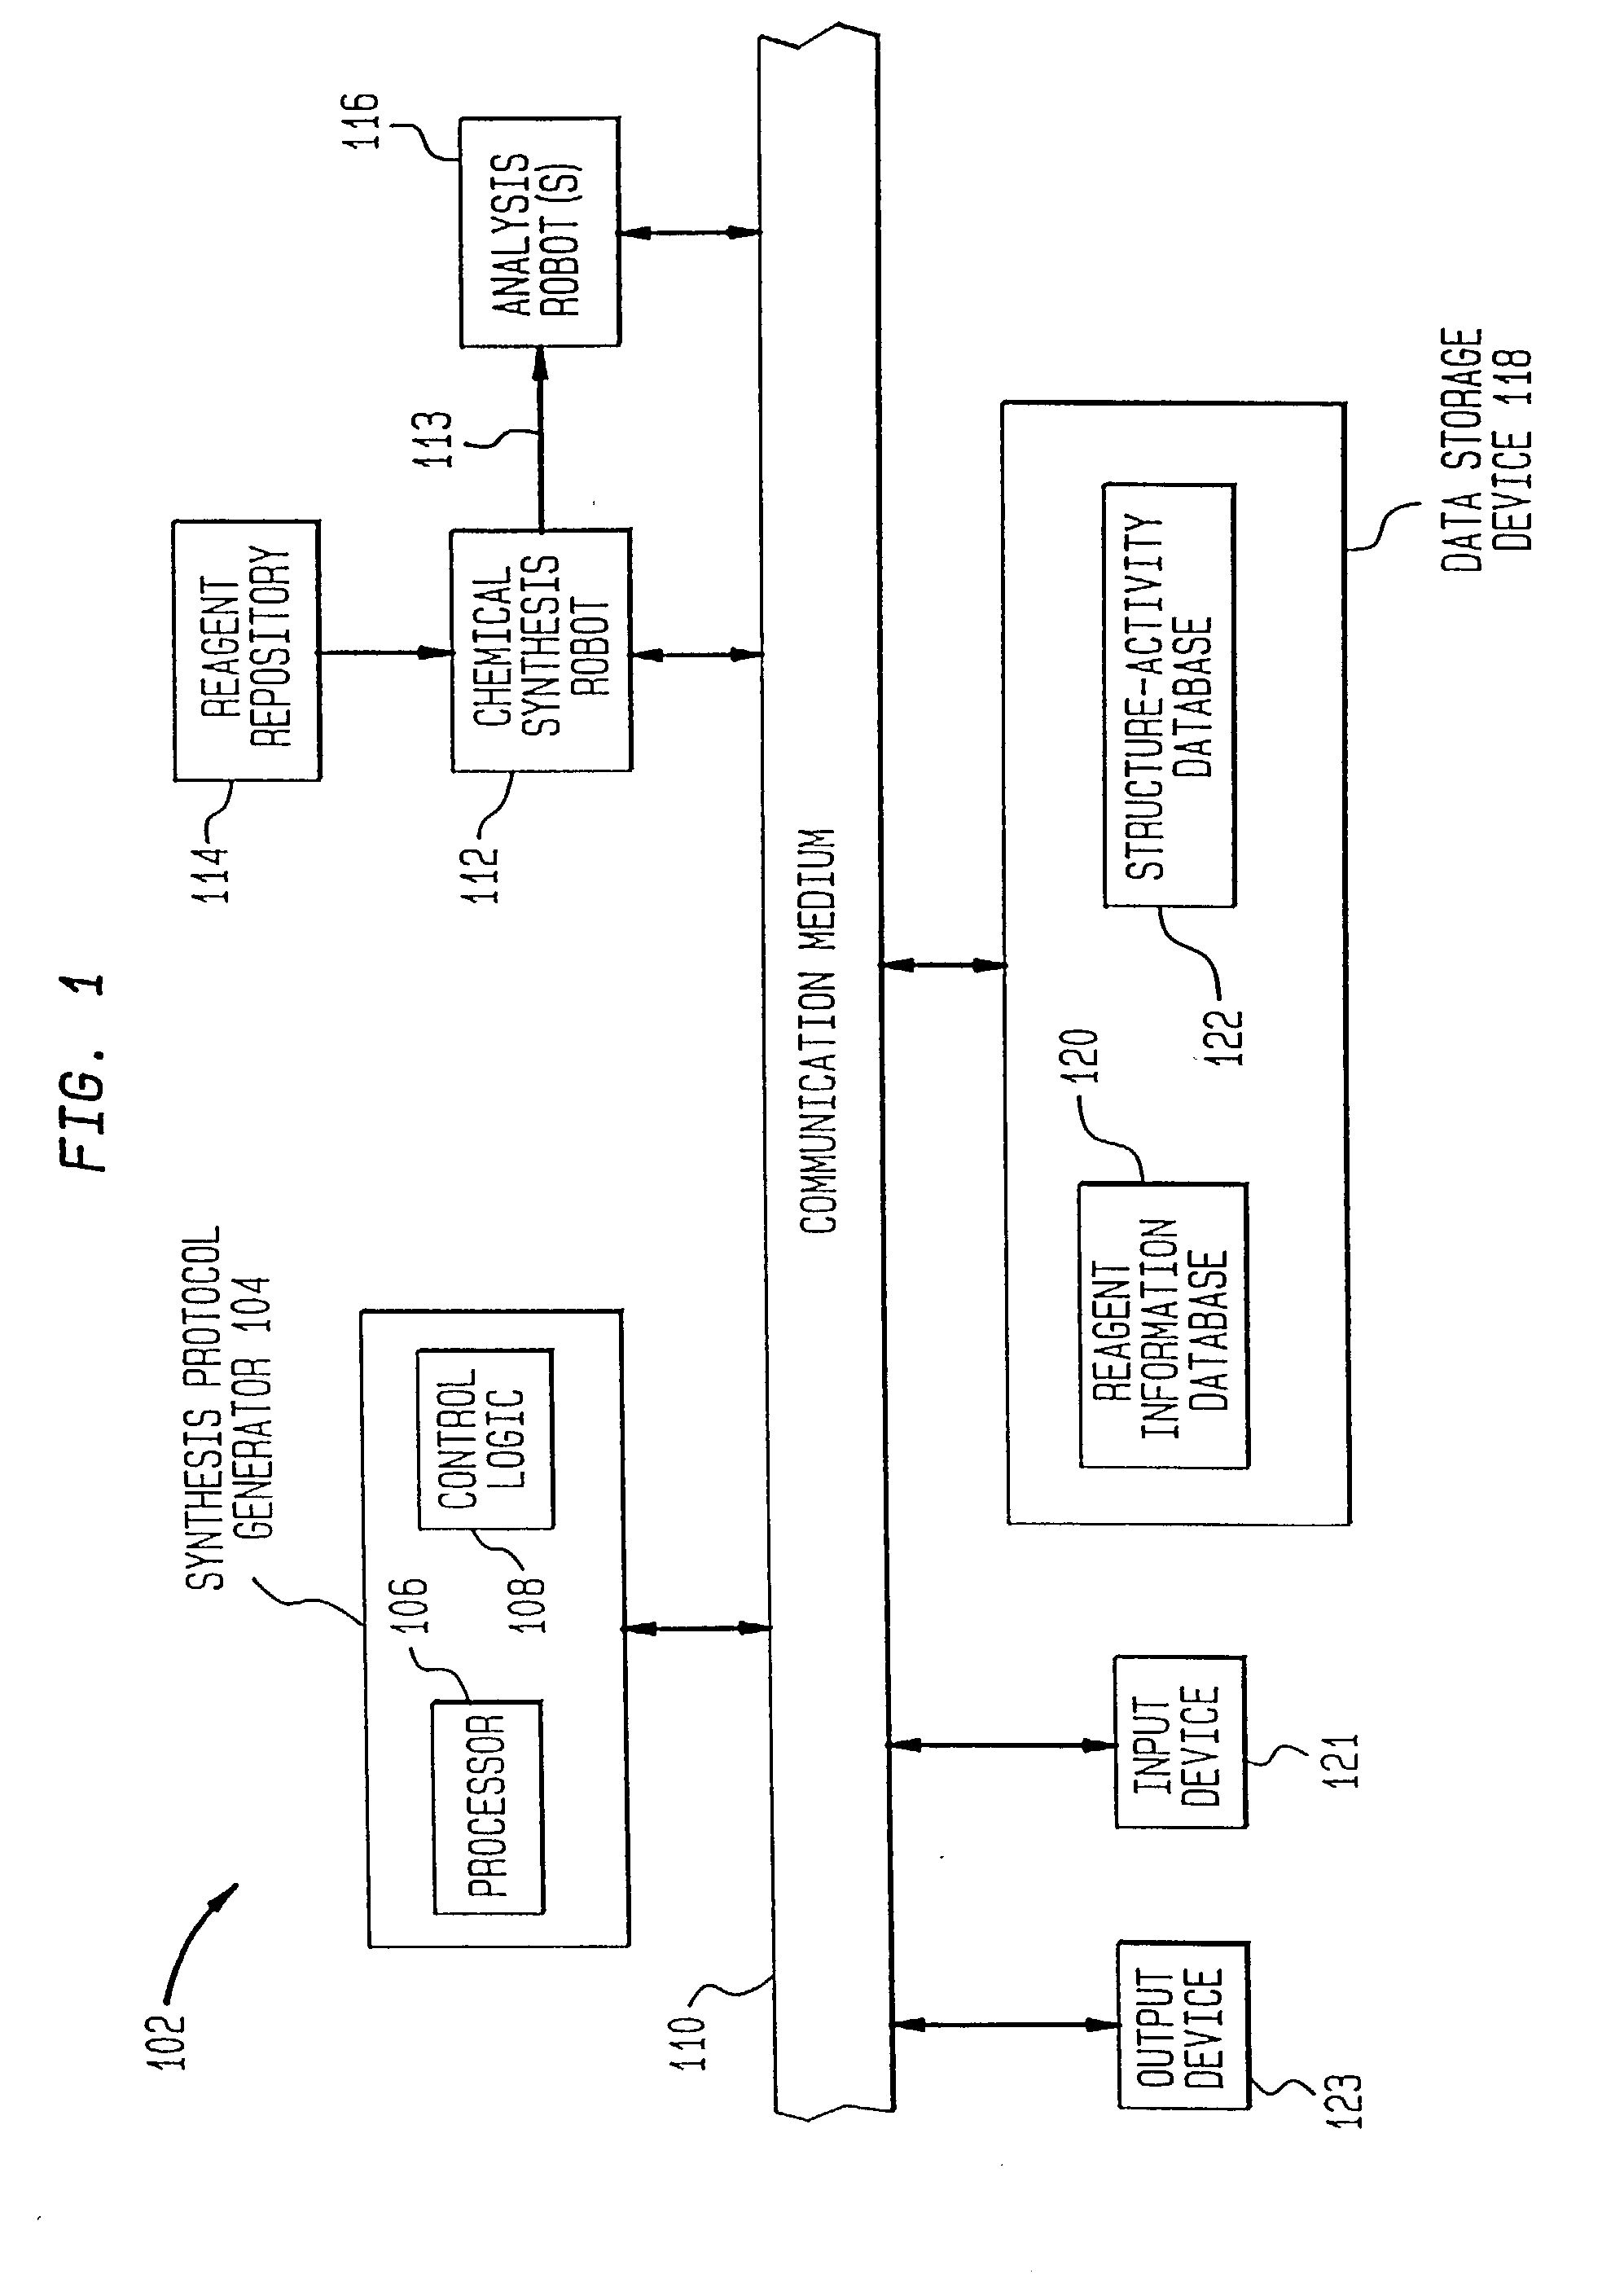 Method of generating chemical compounds having desired properties